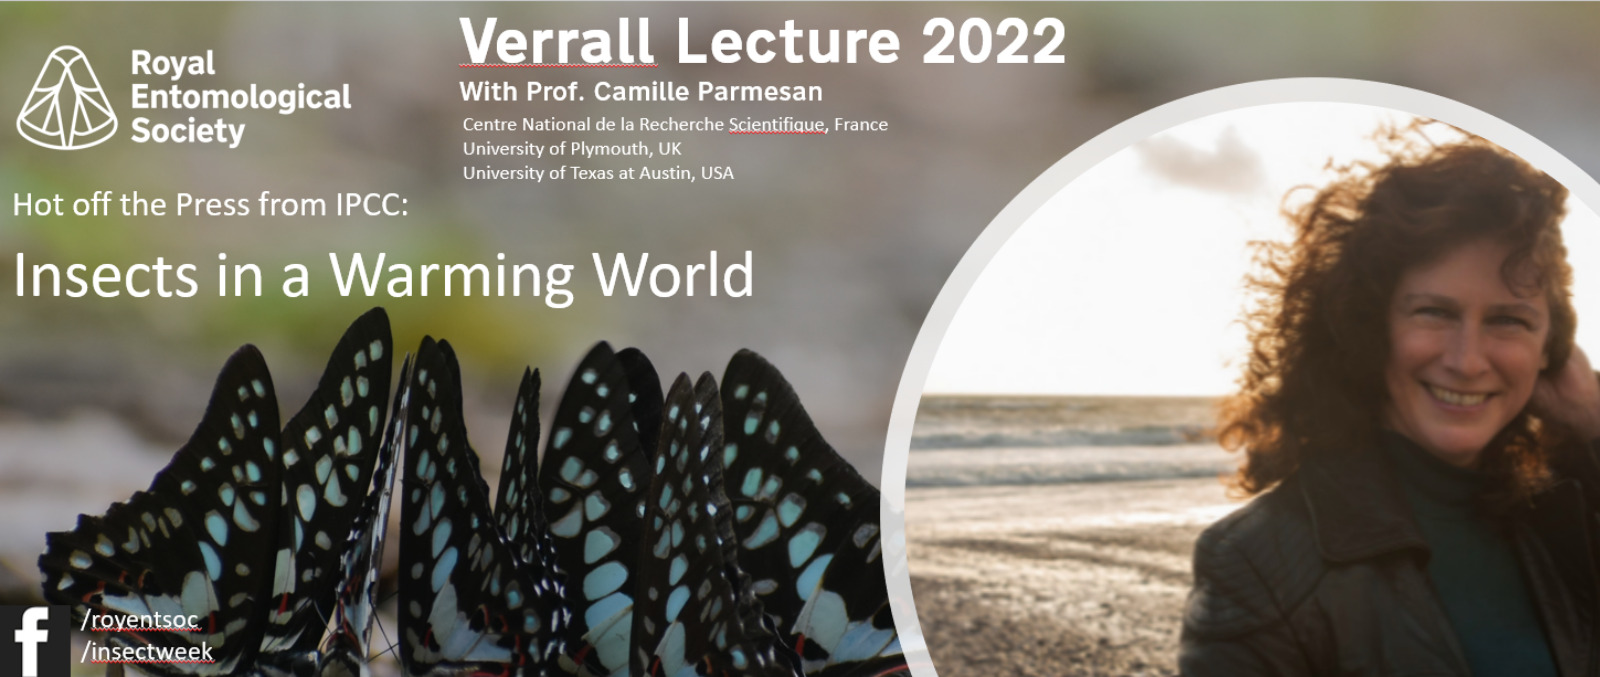 Watch the Verrall Lecture 2022 by Professor Camille Parmesan